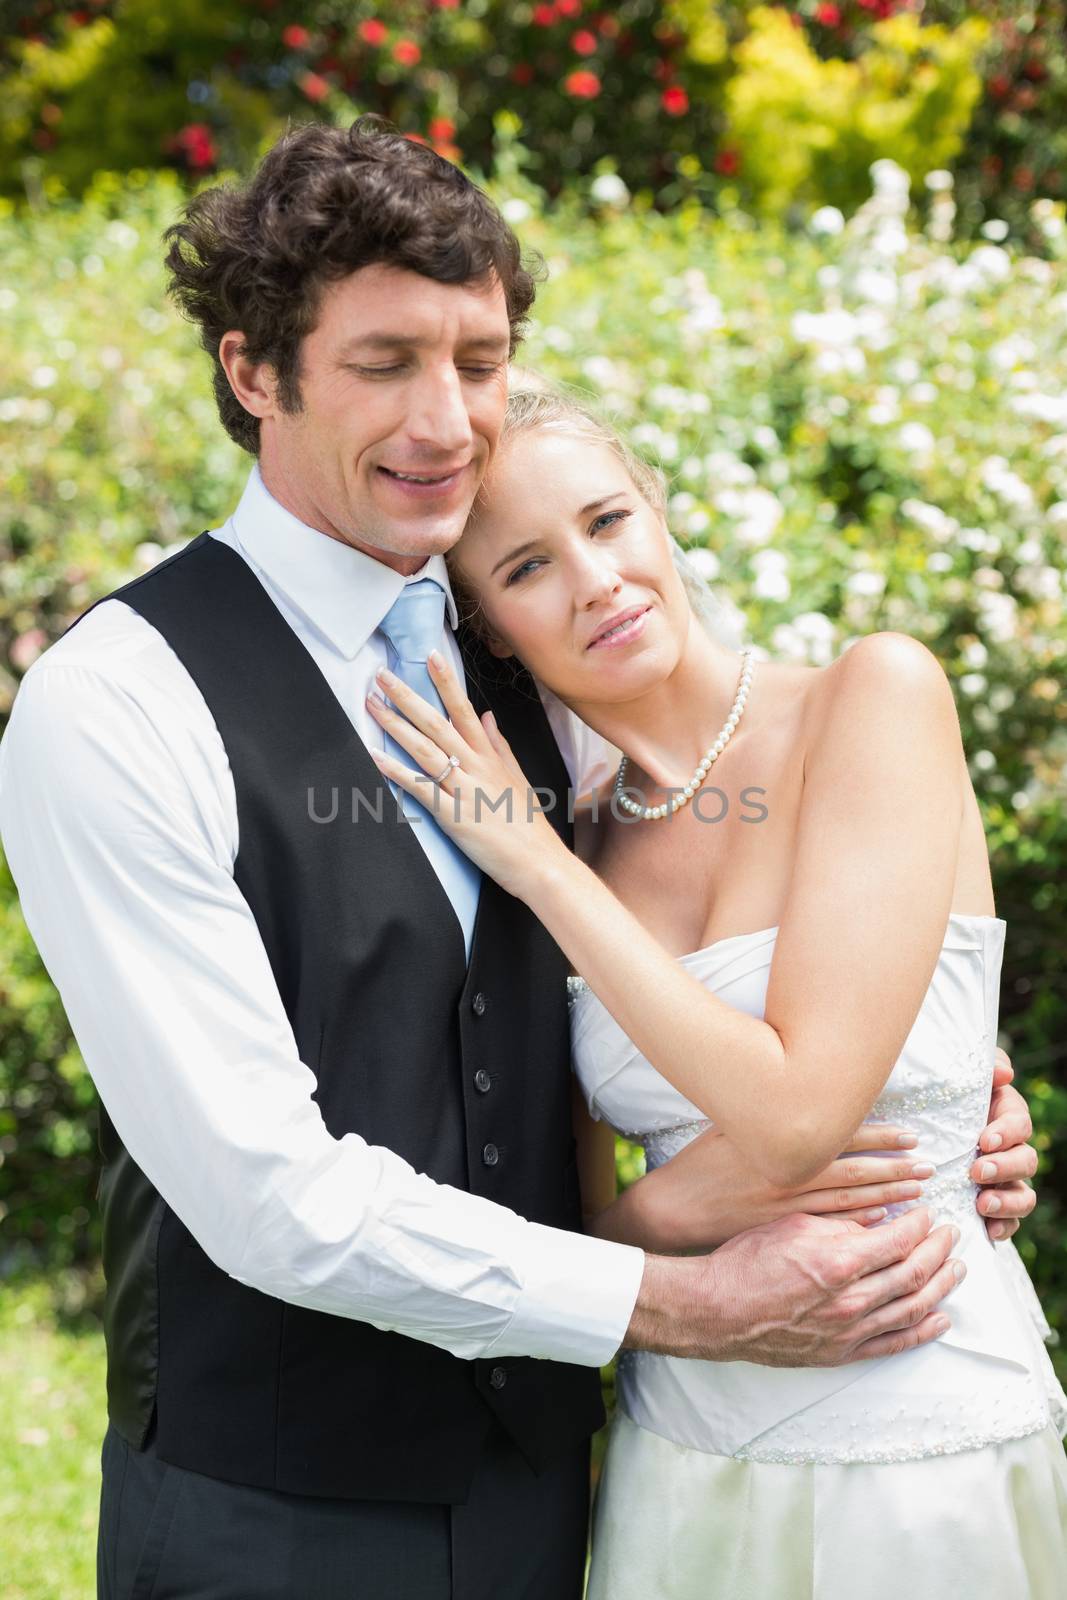 Romantic happy newlywed couple embracing each other by Wavebreakmedia